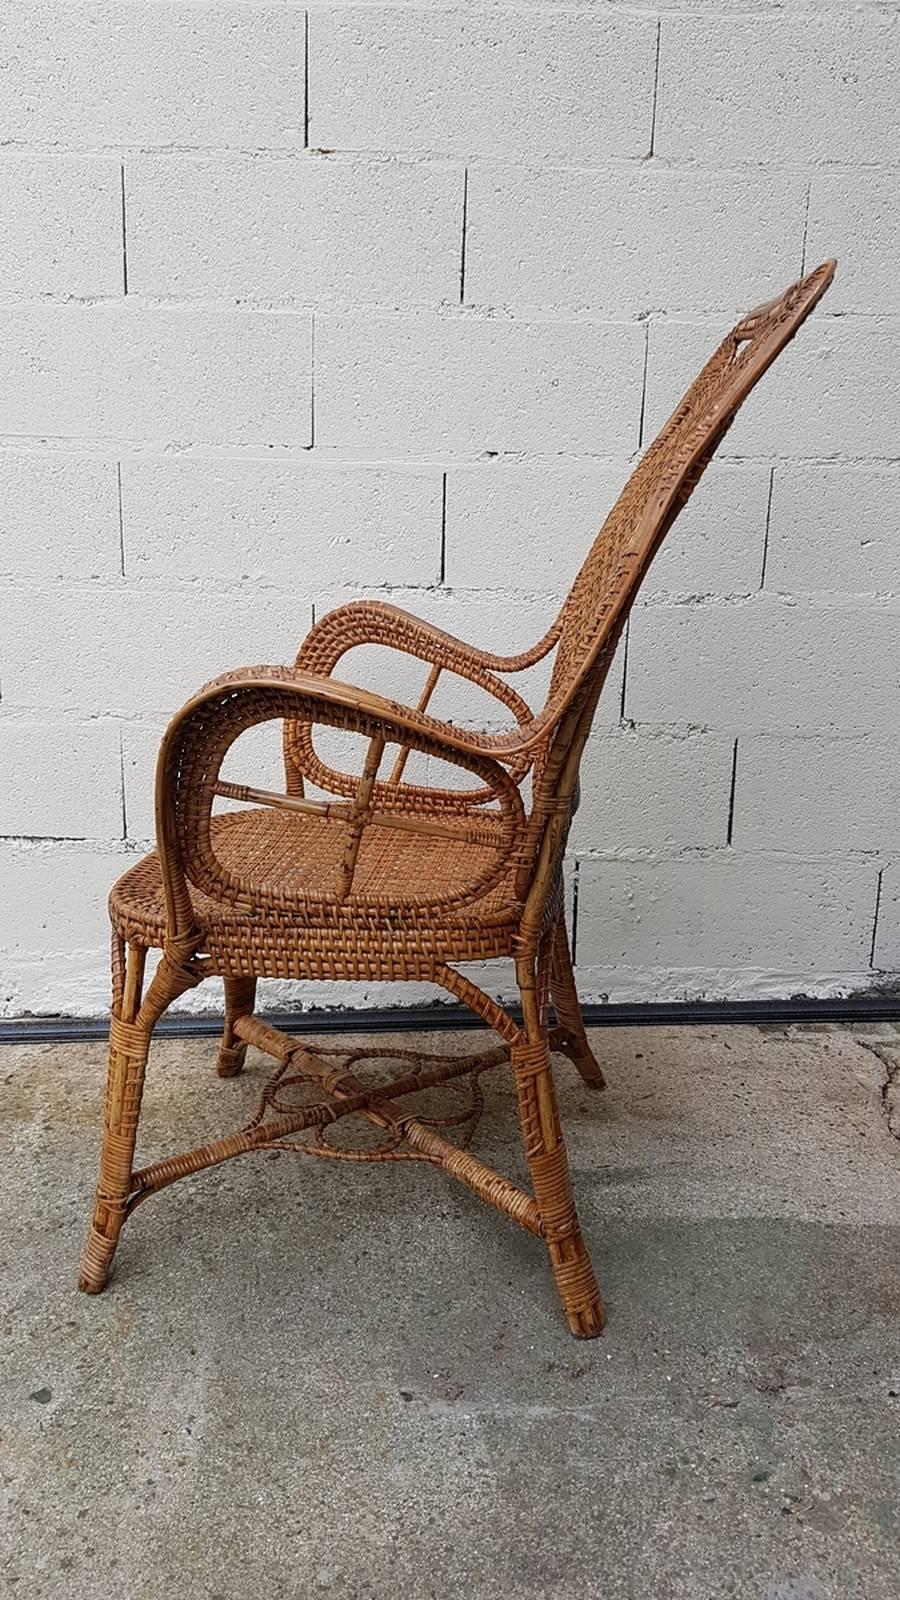 Elegant rattan armchair realized by the Perret & Vibert Manufactory in France. The originality of this armchair comes from of its chair’s back and also from the armrests figuring a cross.

The taste for exoticism during the Second Empire explains